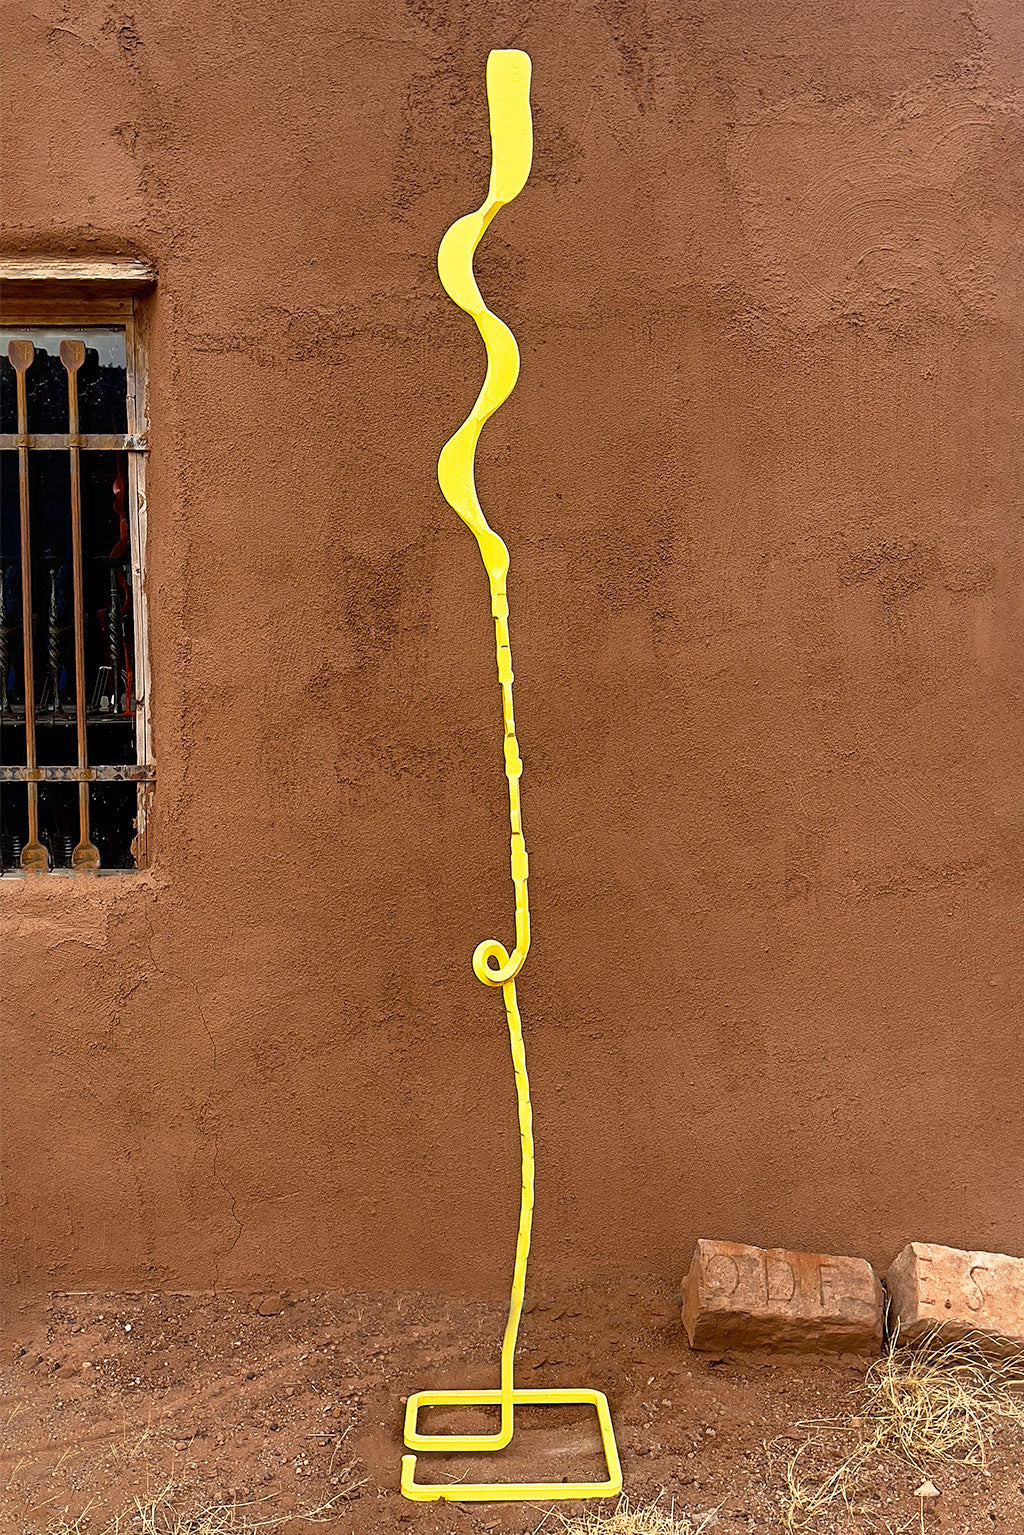 Pineapple Yellow Free Standing Single Bloom sculpture against an adobe wall. 